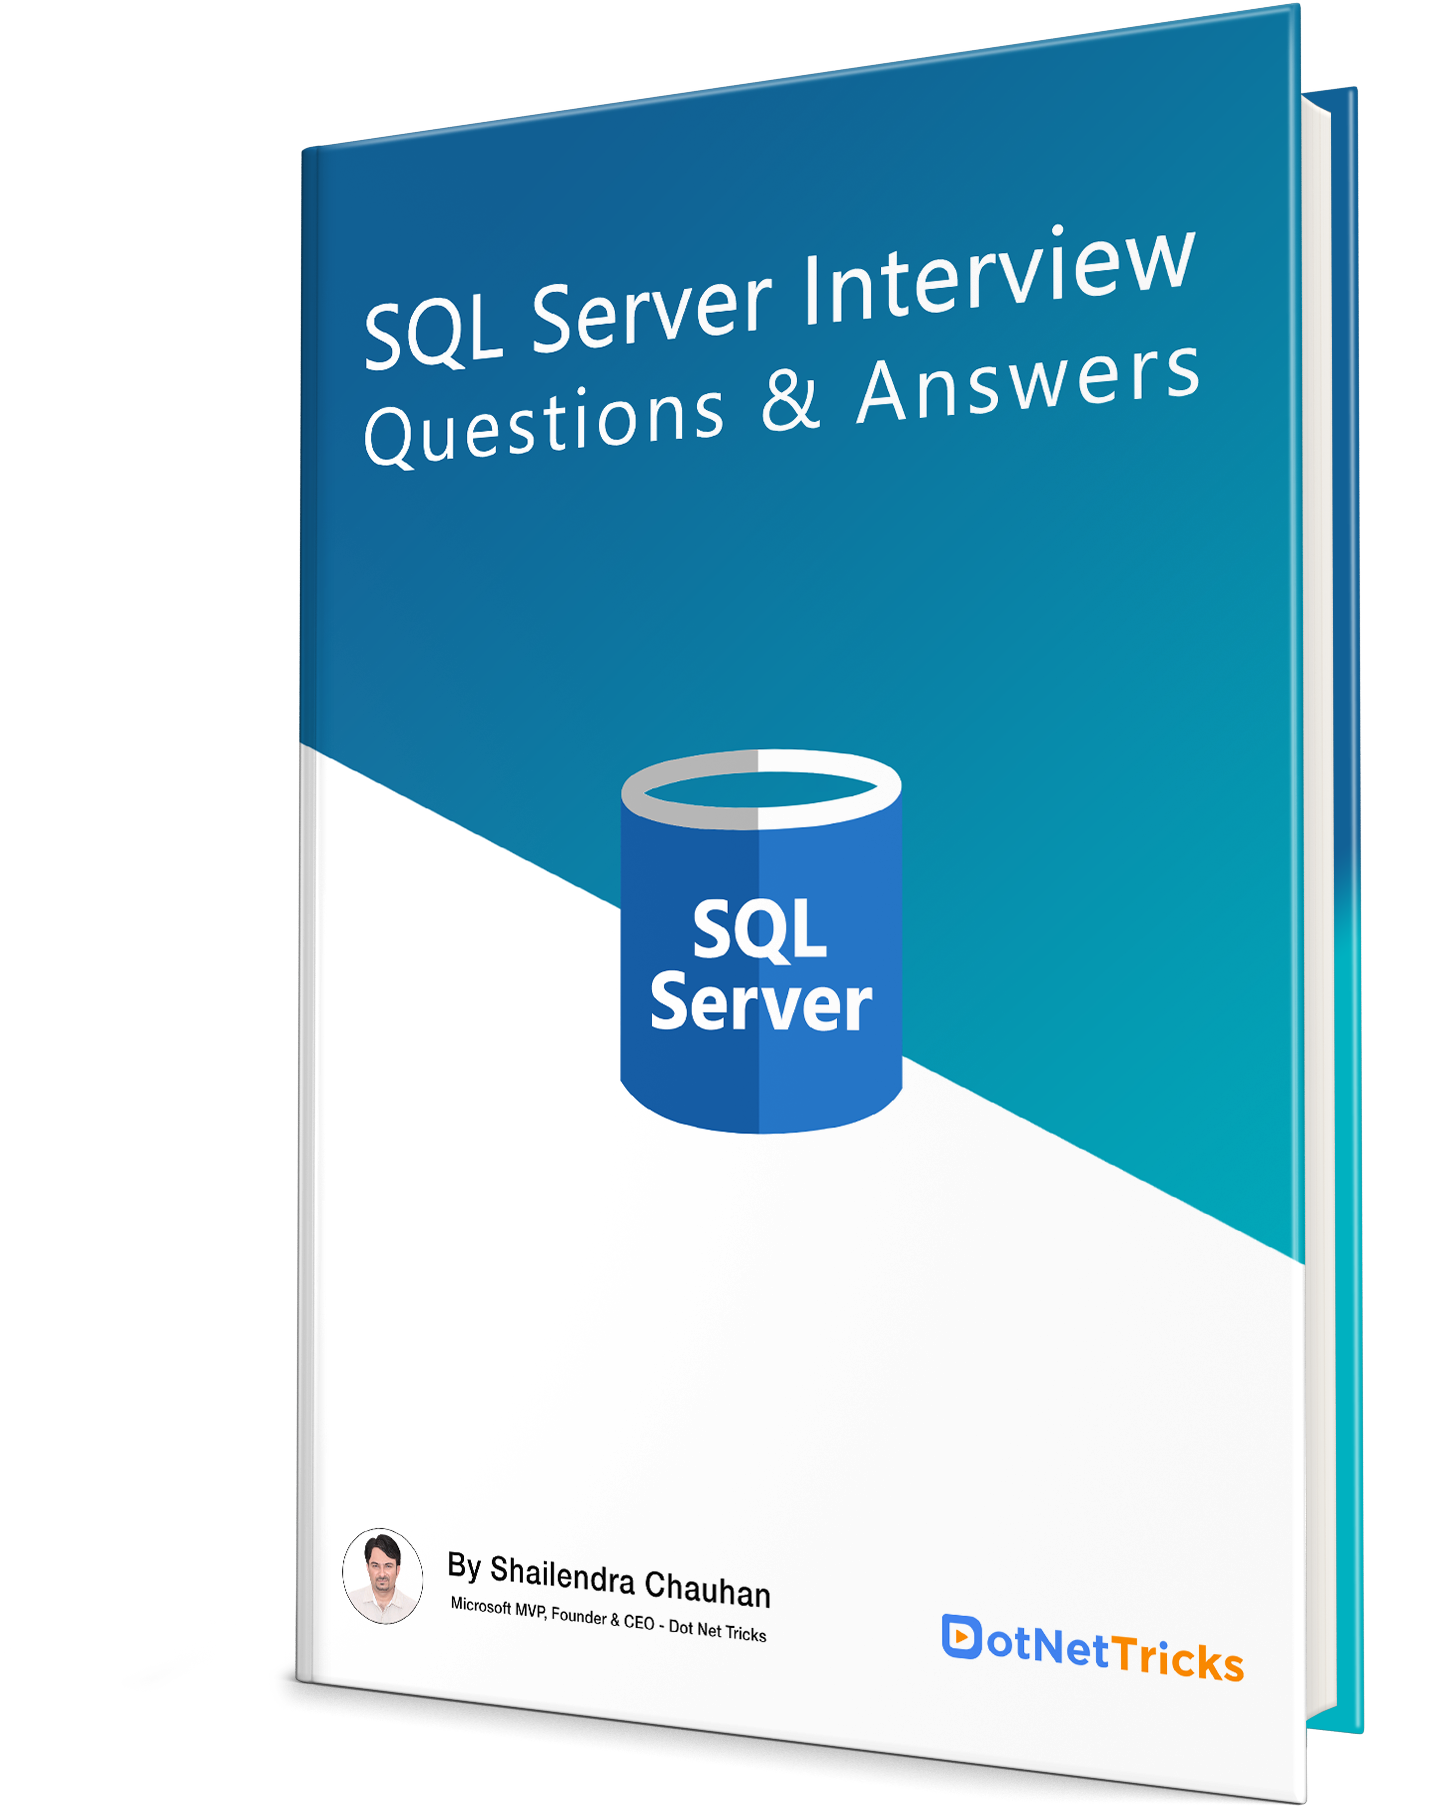 SQL Server Interview Questions & Answers eBook